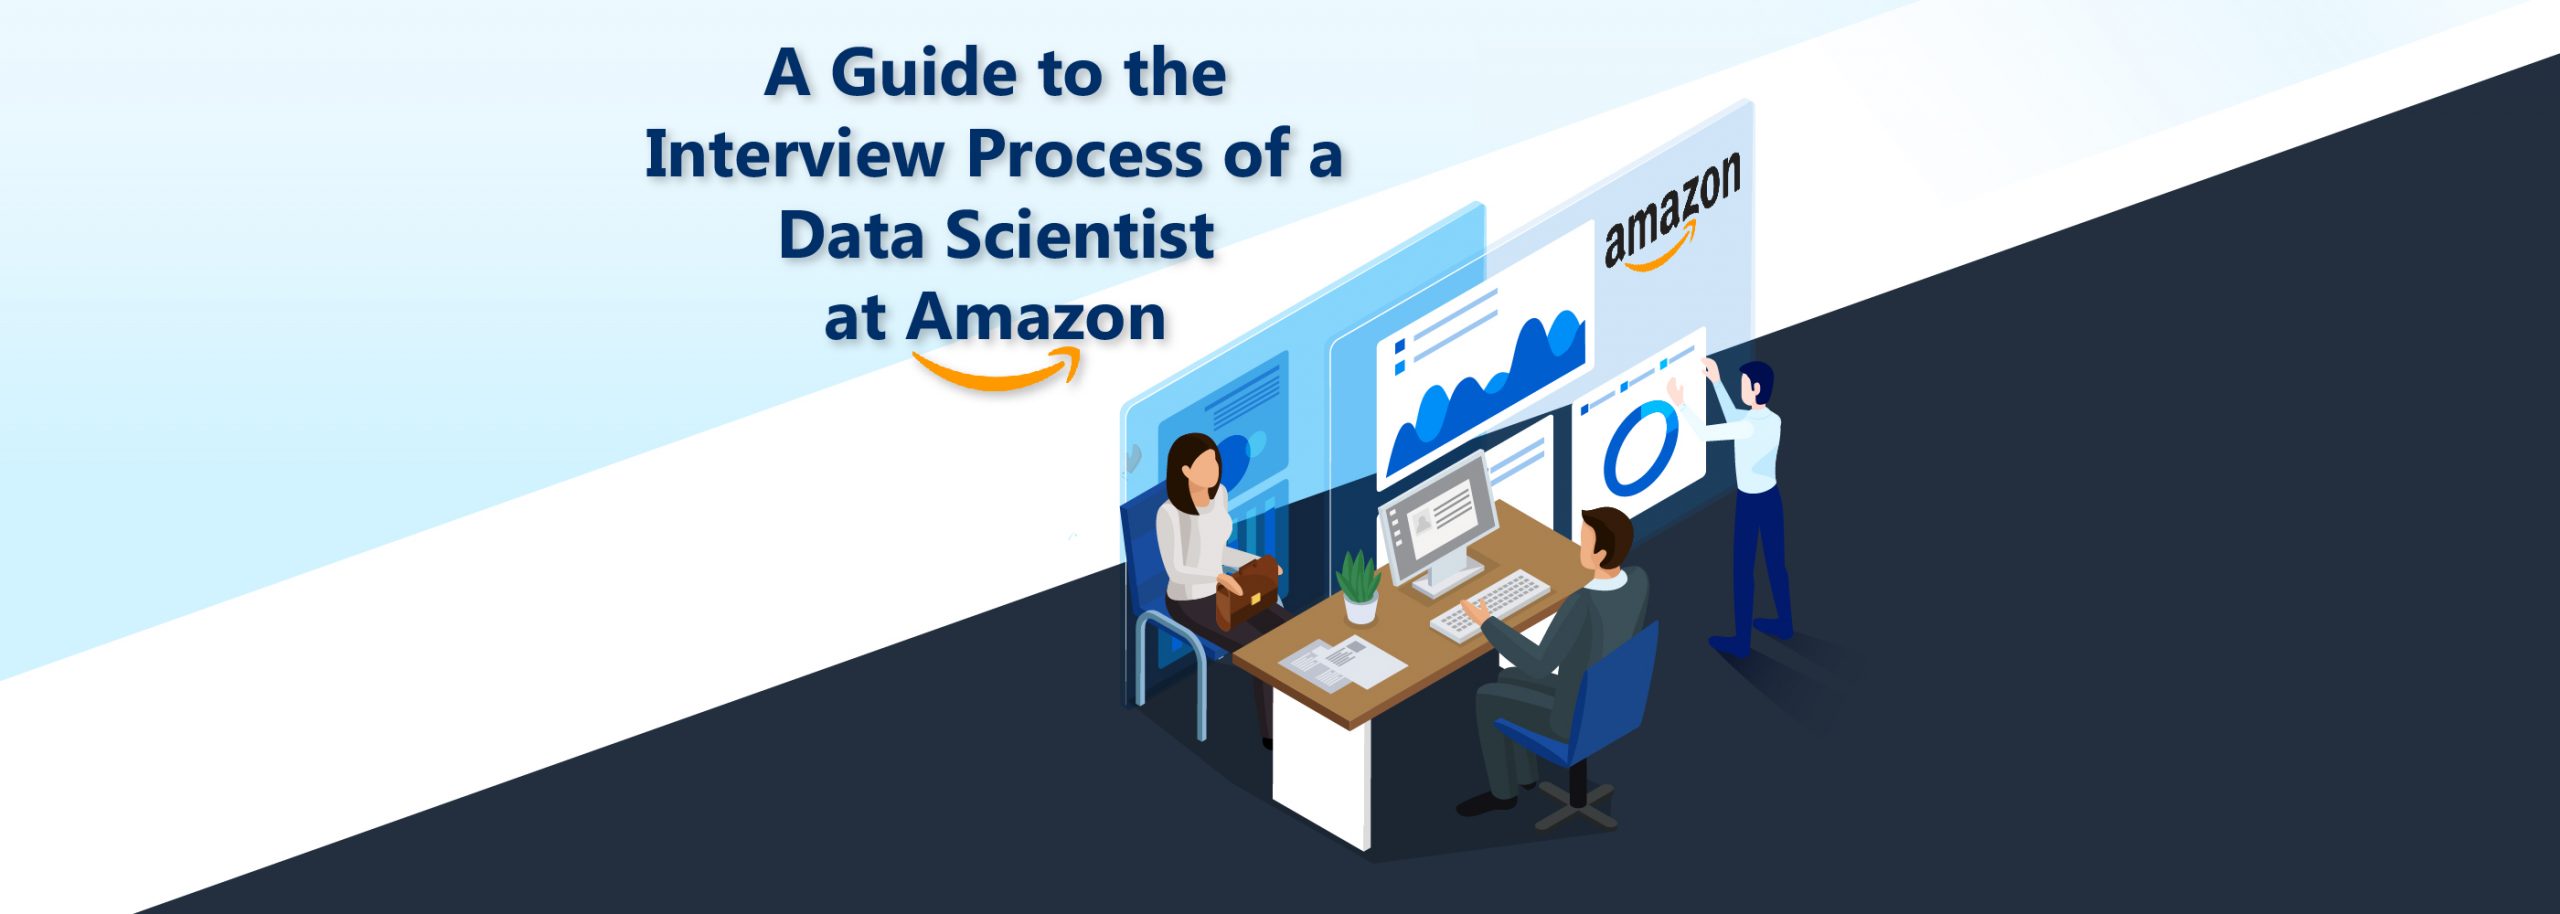 A Guide to the Interview Process of a Data Scientist at Amazon-01